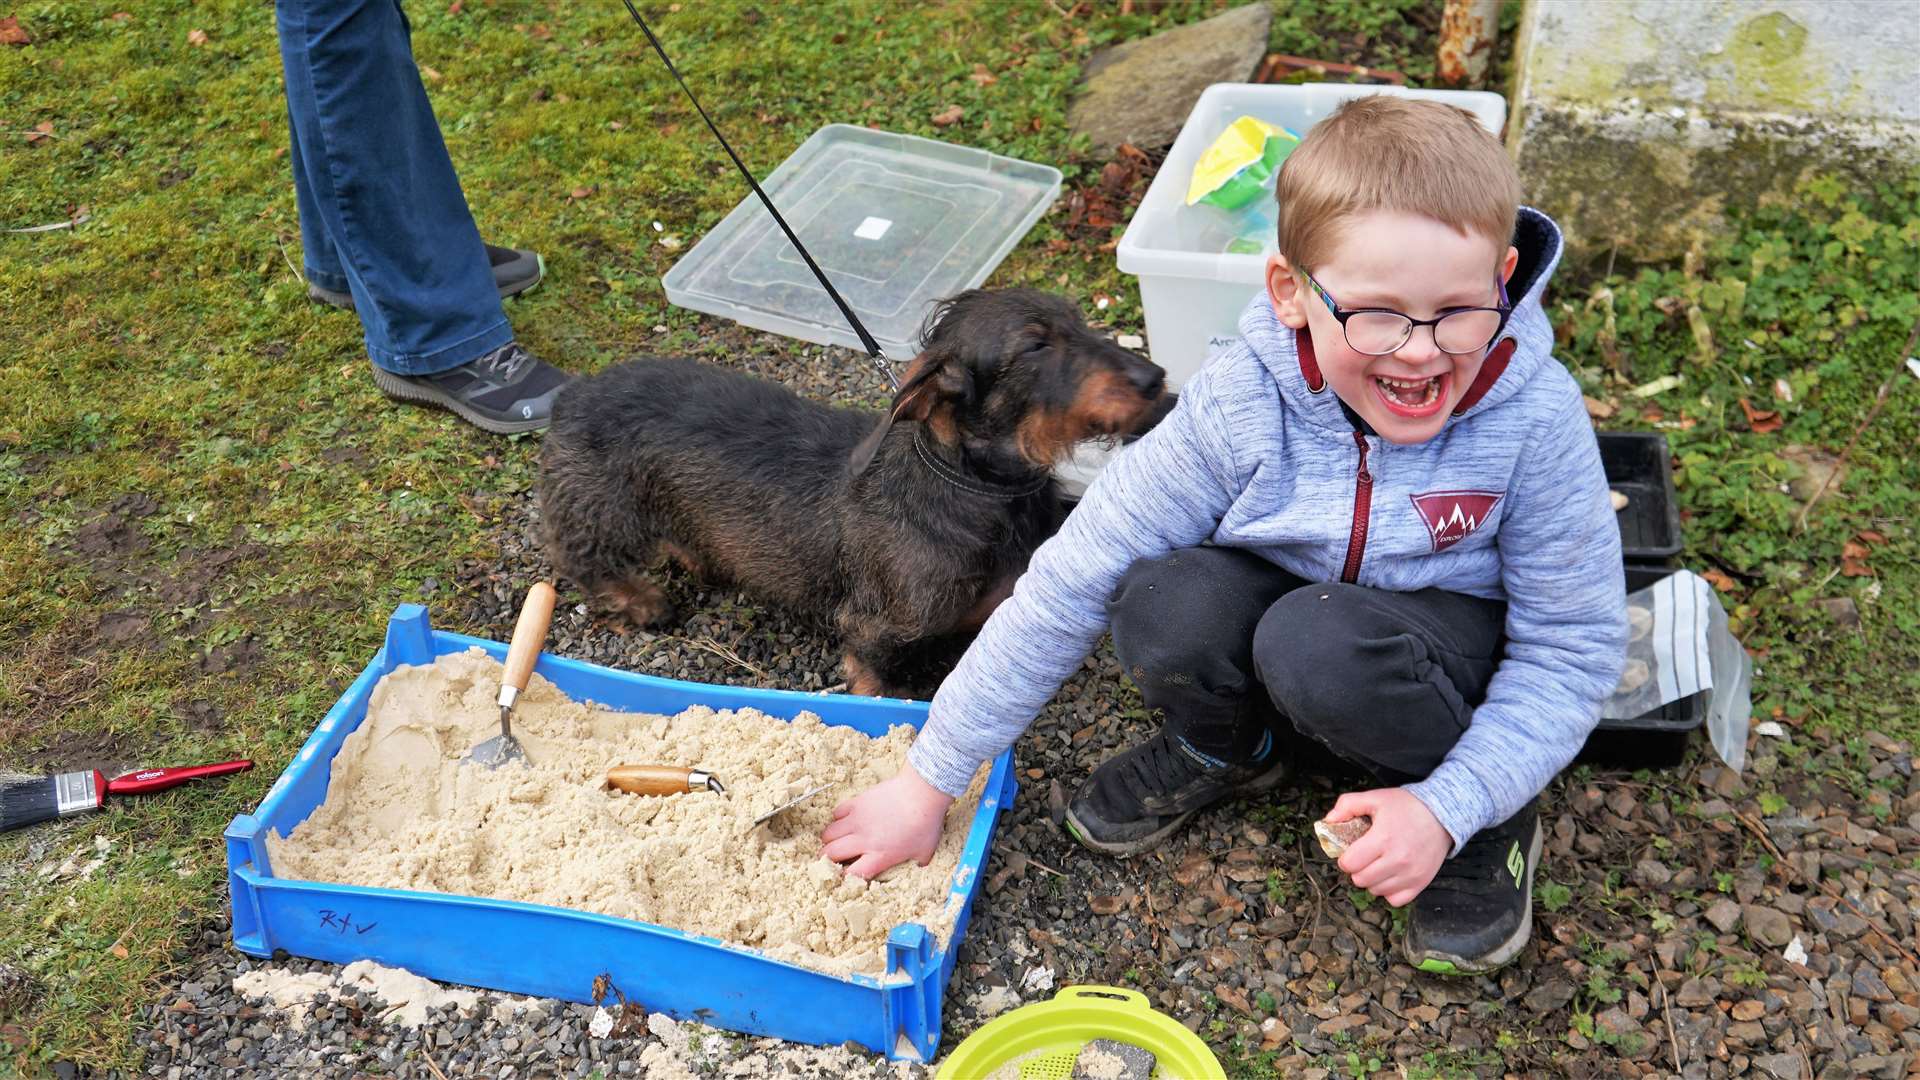 Young Jordan and Lilly the dachshund dig for archaeological treasures in a sand pit. Picture: DGS